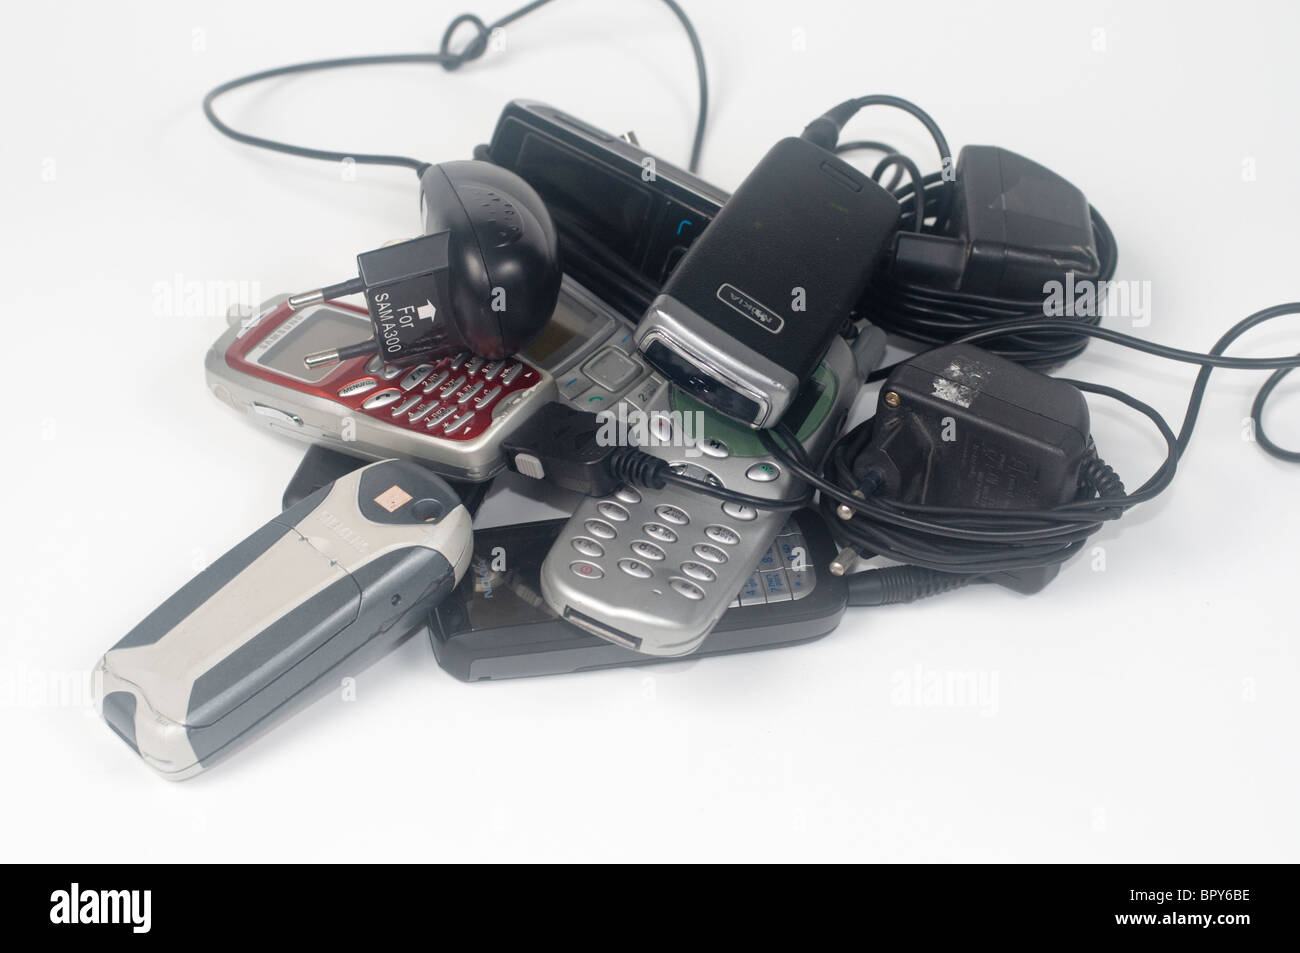 A pile of old disused mobile phones and chargers Stock Photo